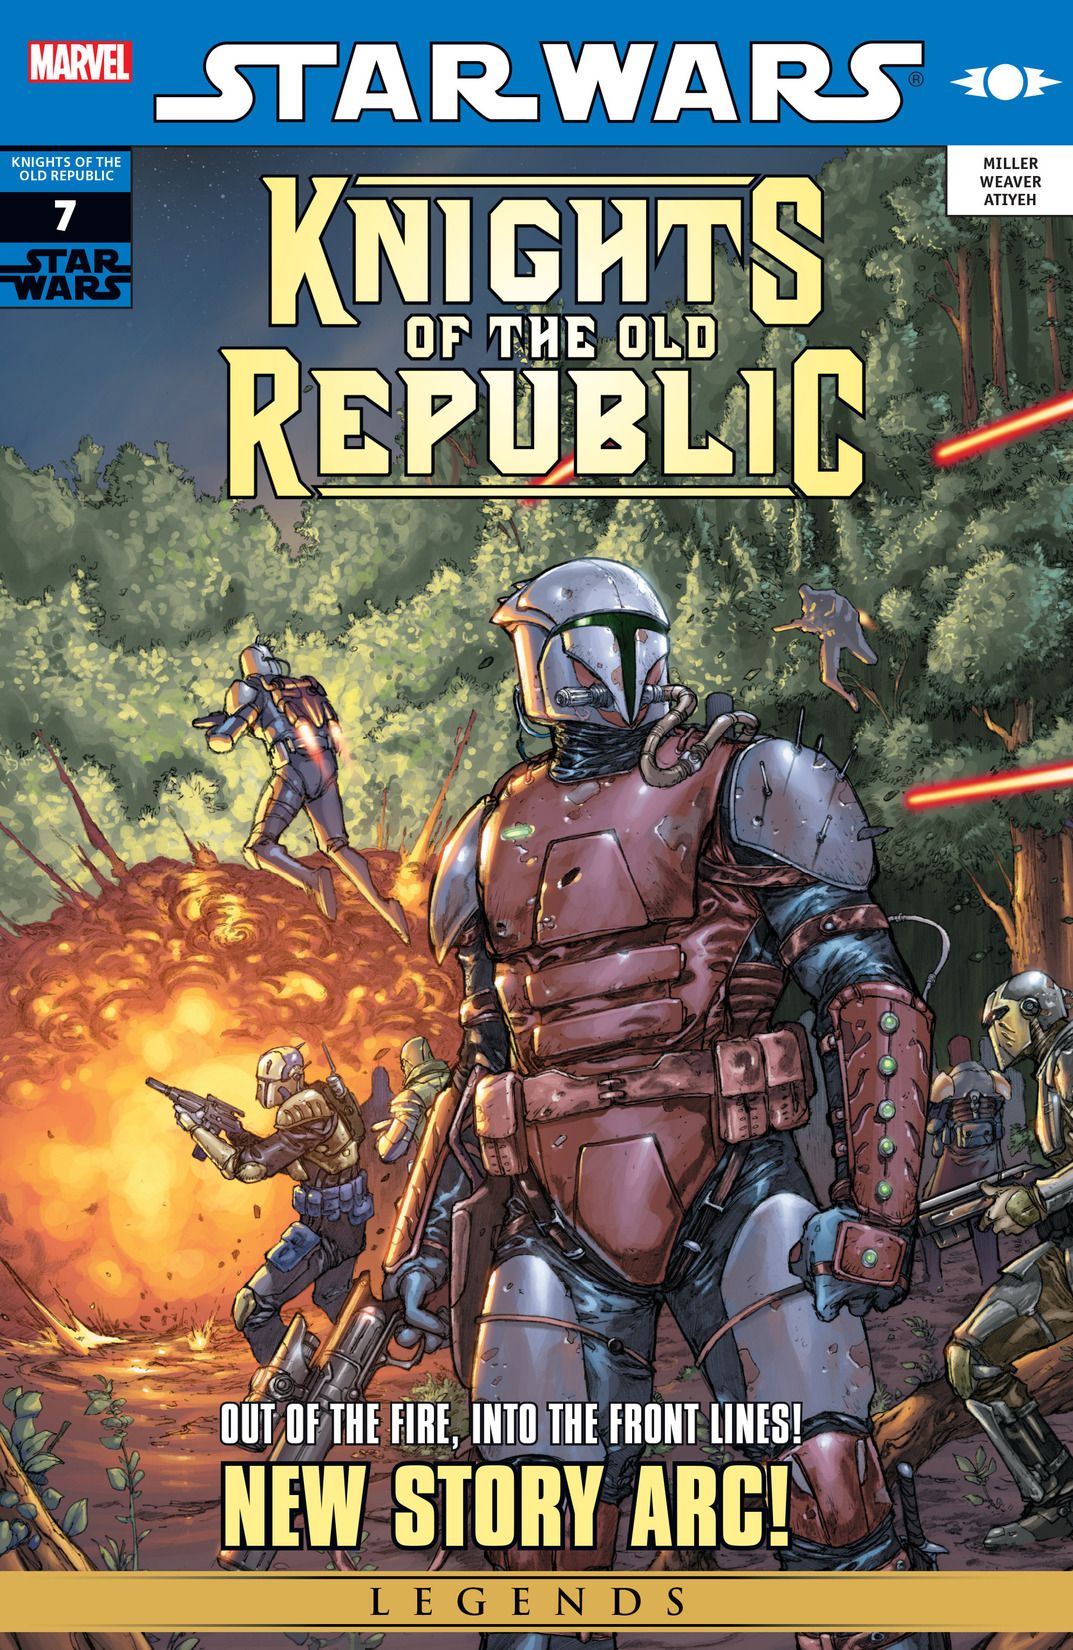 The wildest adventure in the ancient history of Star Wars gets wilder in a brand-new story arc featuring the most feared warriors in the galaxy, the Mandalorians! Leaving the treacherous streets of Taris behind them, fugitive Padawan Zayne Carrick and the rag-tag crew of the Last Resort, cook up a scheme to pilfer much needed supplies from an unsuspecting bunch of miserly miners. Unfortunately, any attempts at avoiding attention are for naught when the group finds they've landed themselves smack dab in the middle of the Republic and Mandalorian conflict!